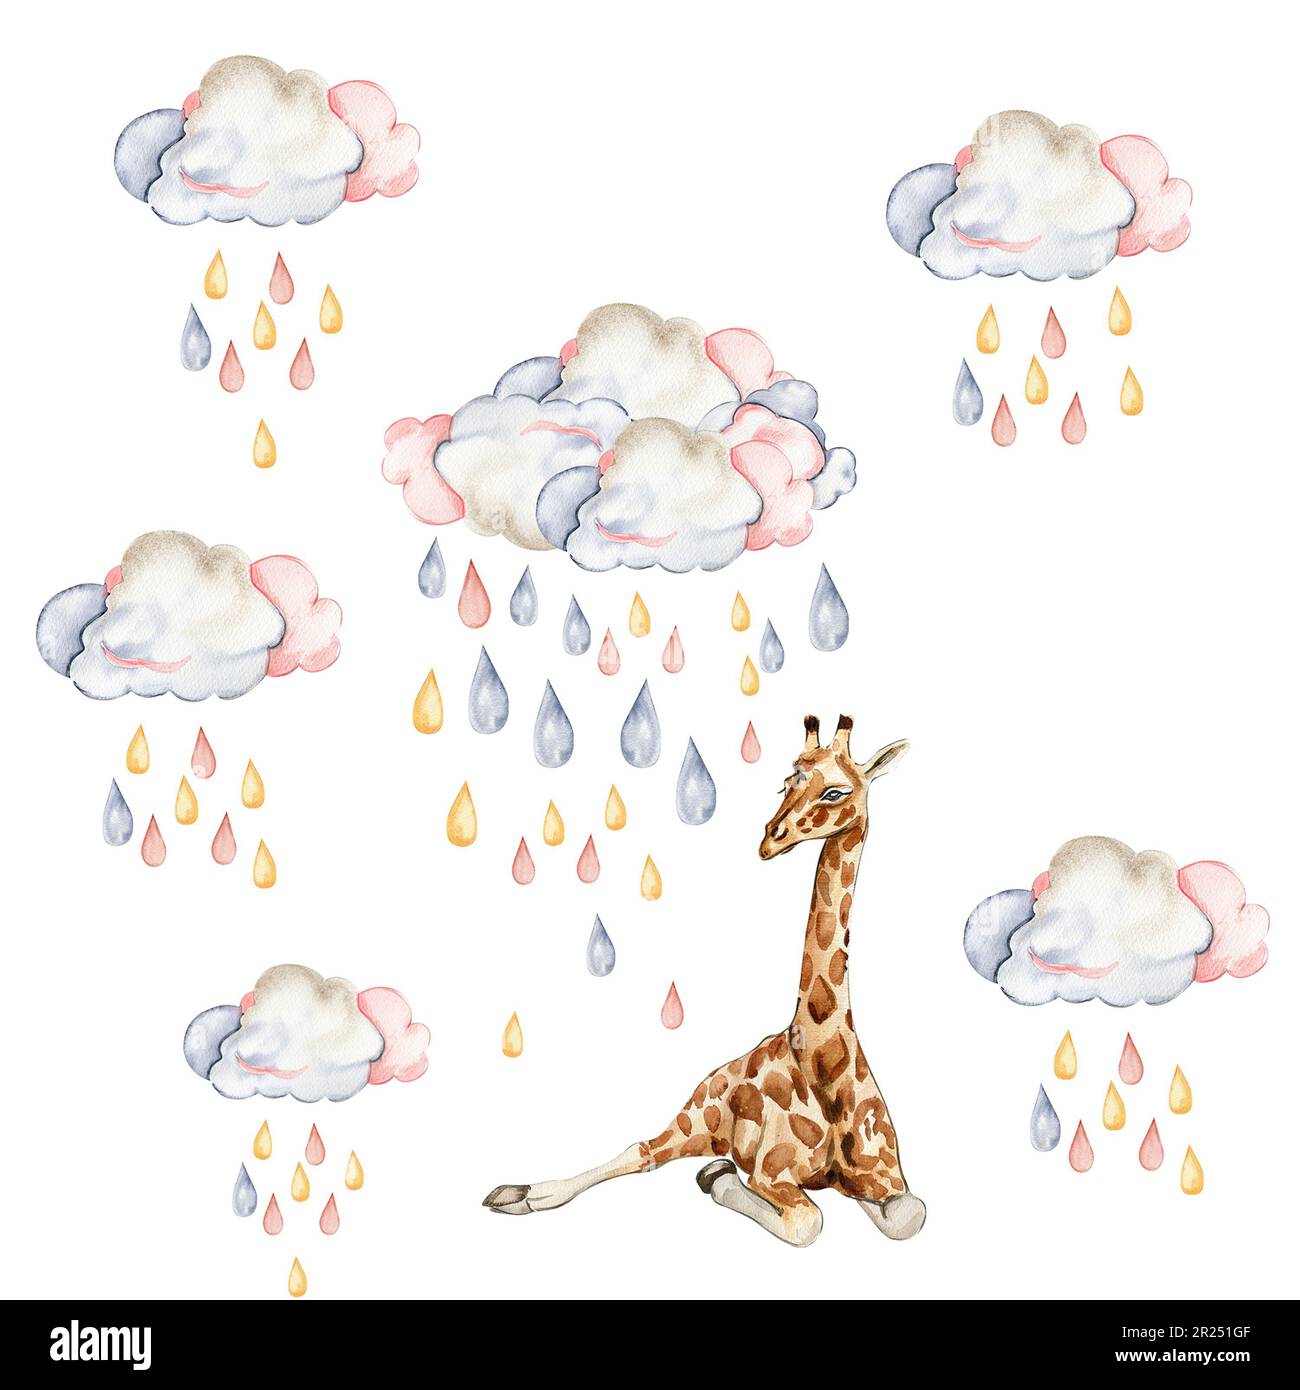 Watercolor hand painted clowds with drops and giraffe seamless pattern. Illustration isolated on white background. Design for fabric, baby shower part Stock Photo